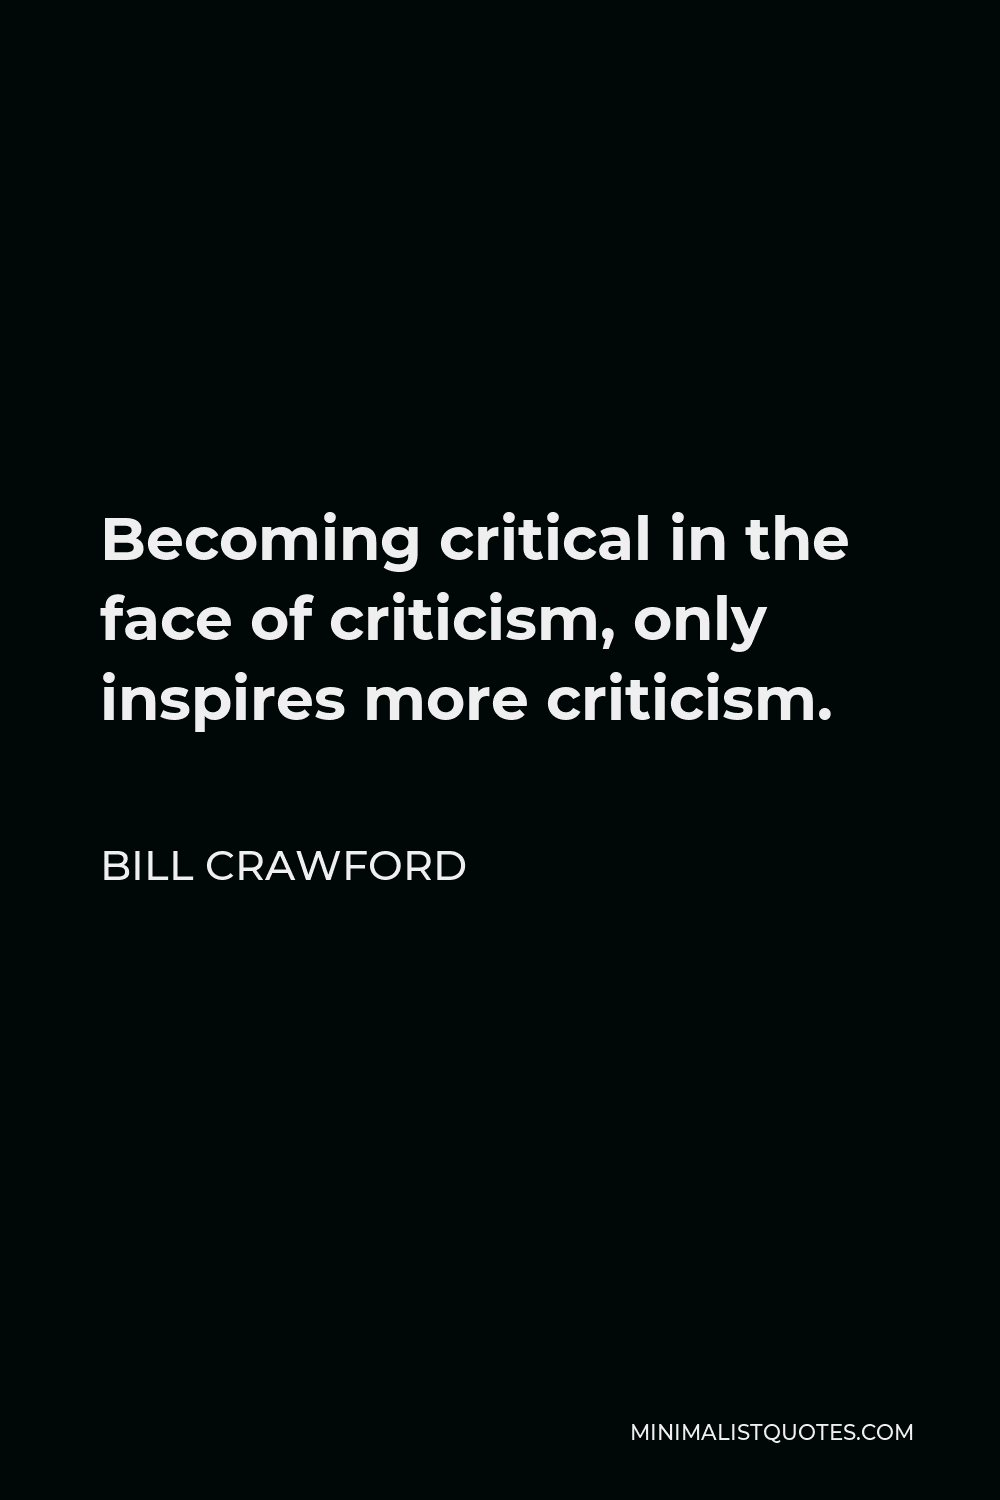 Bill Crawford Quote - Becoming critical in the face of criticism, only inspires more criticism.